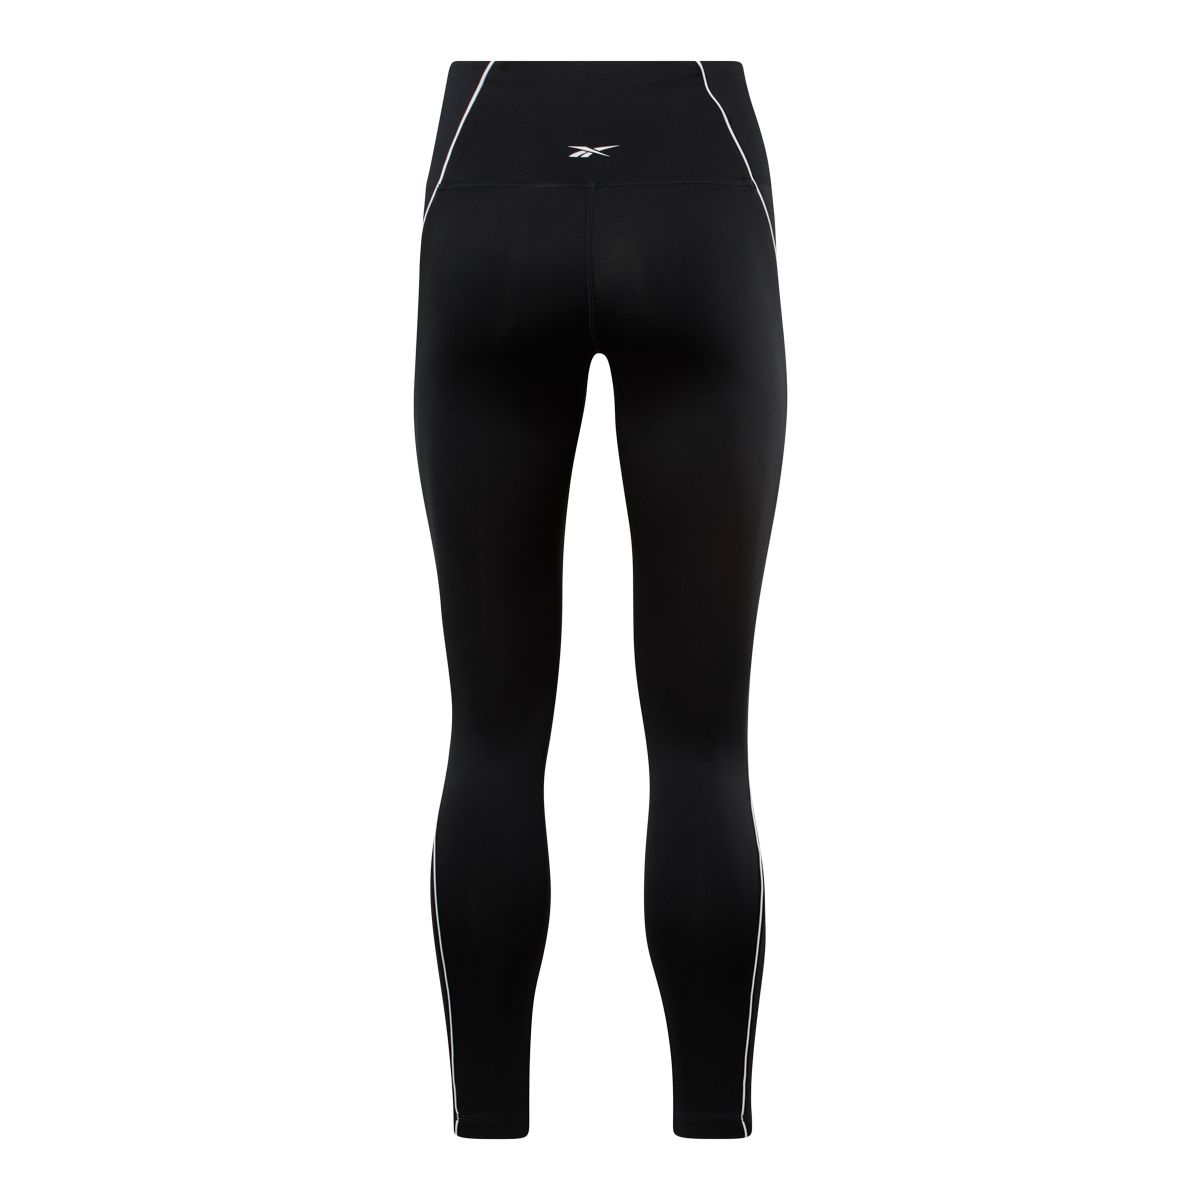 Reebok Women's Wor Ribbed High Rise Tights